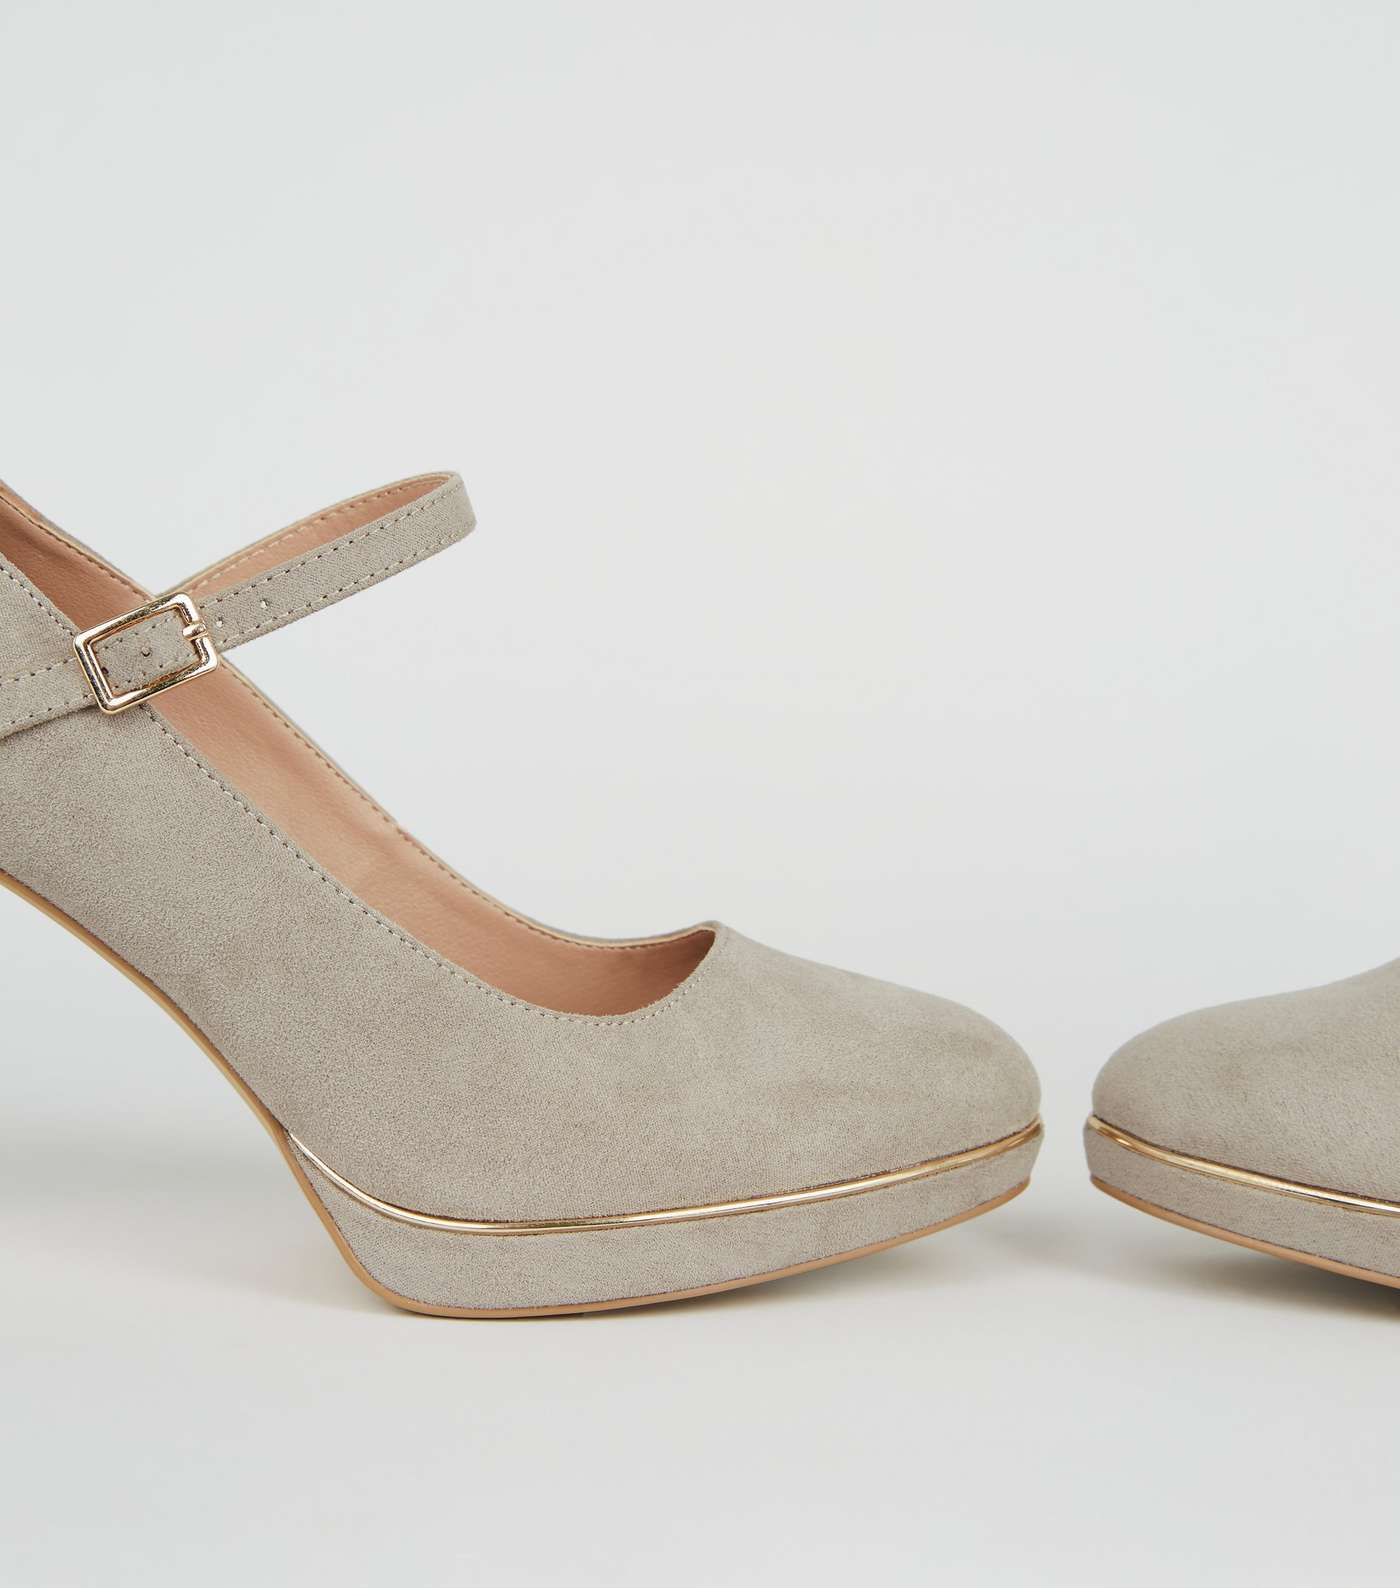 Grey Suedette Piped Trim Mary Jane Courts Image 3